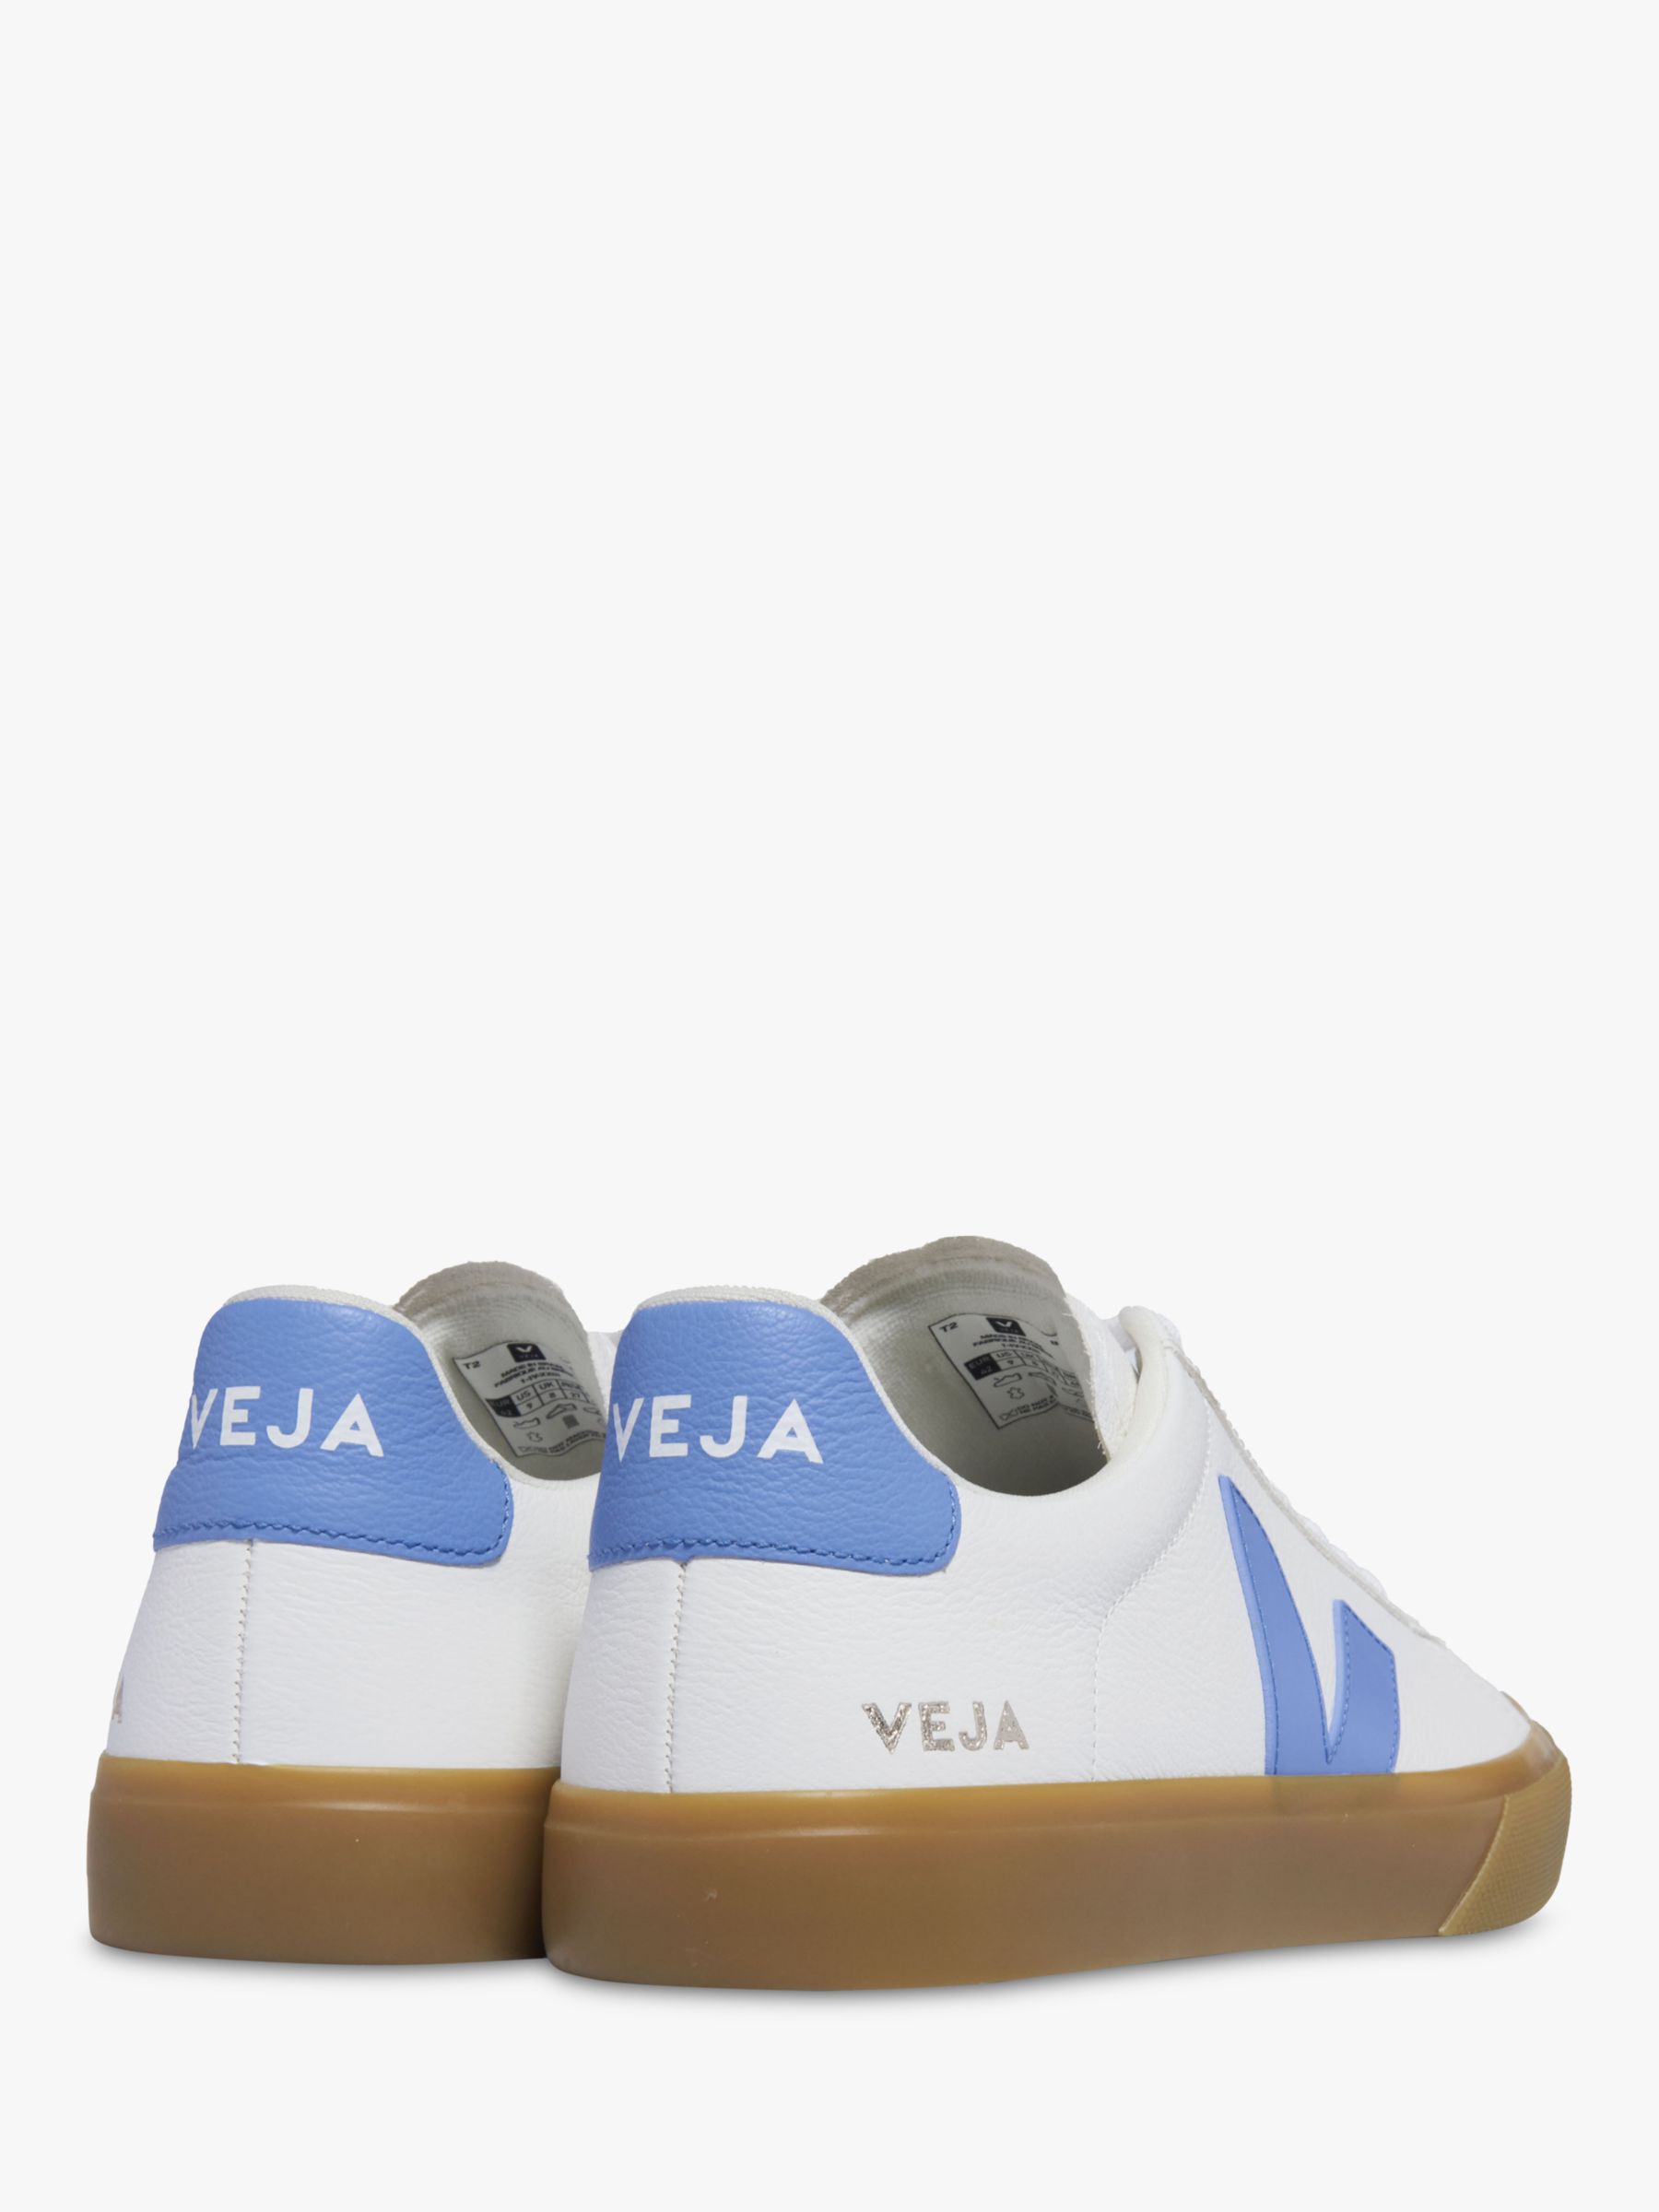 VEJA Campo Leather Contrast Sole Trainers, Extra White/Aqua, 4